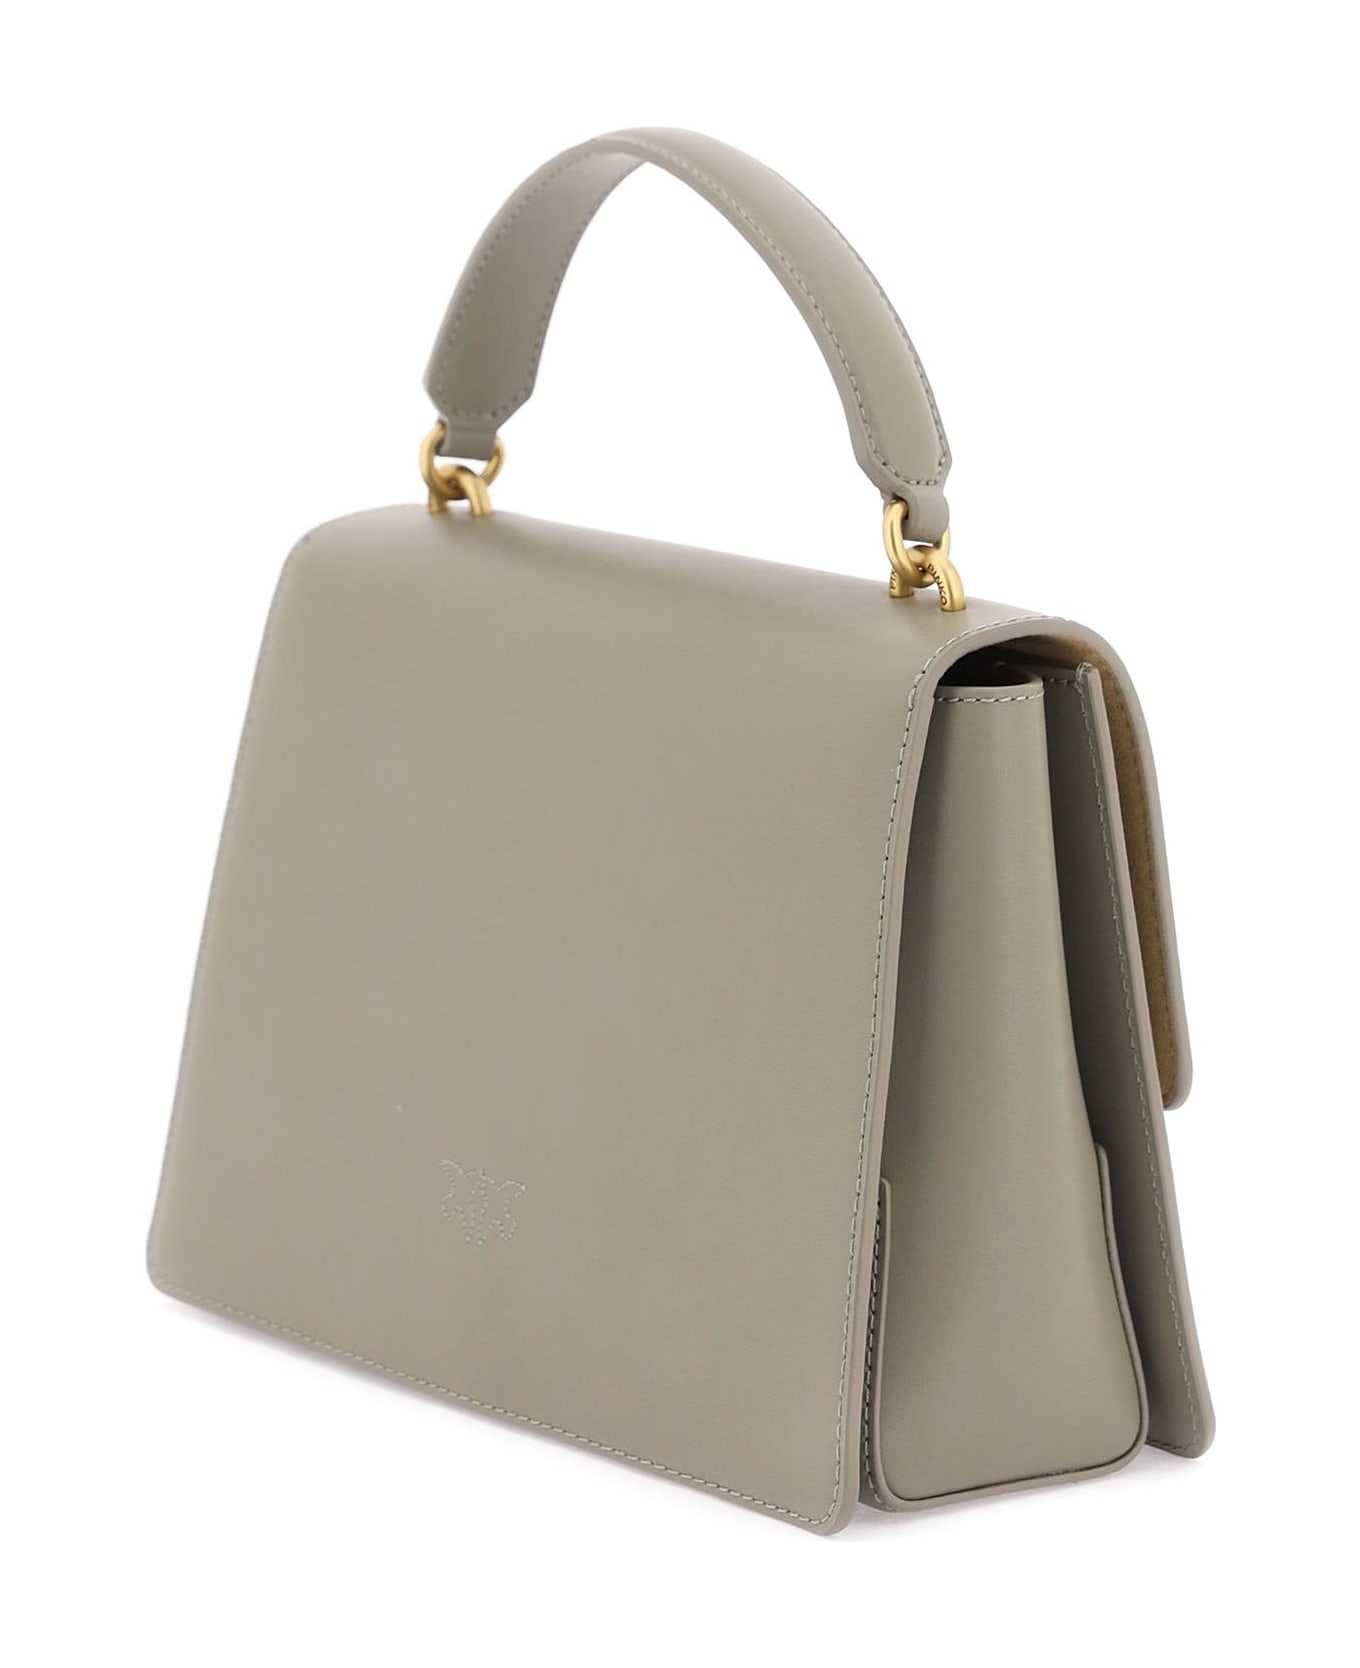 Pinko Love One Top Handle Classic Light Bag - NOCE ANTIQUE GOLD (Grey) トートバッグ